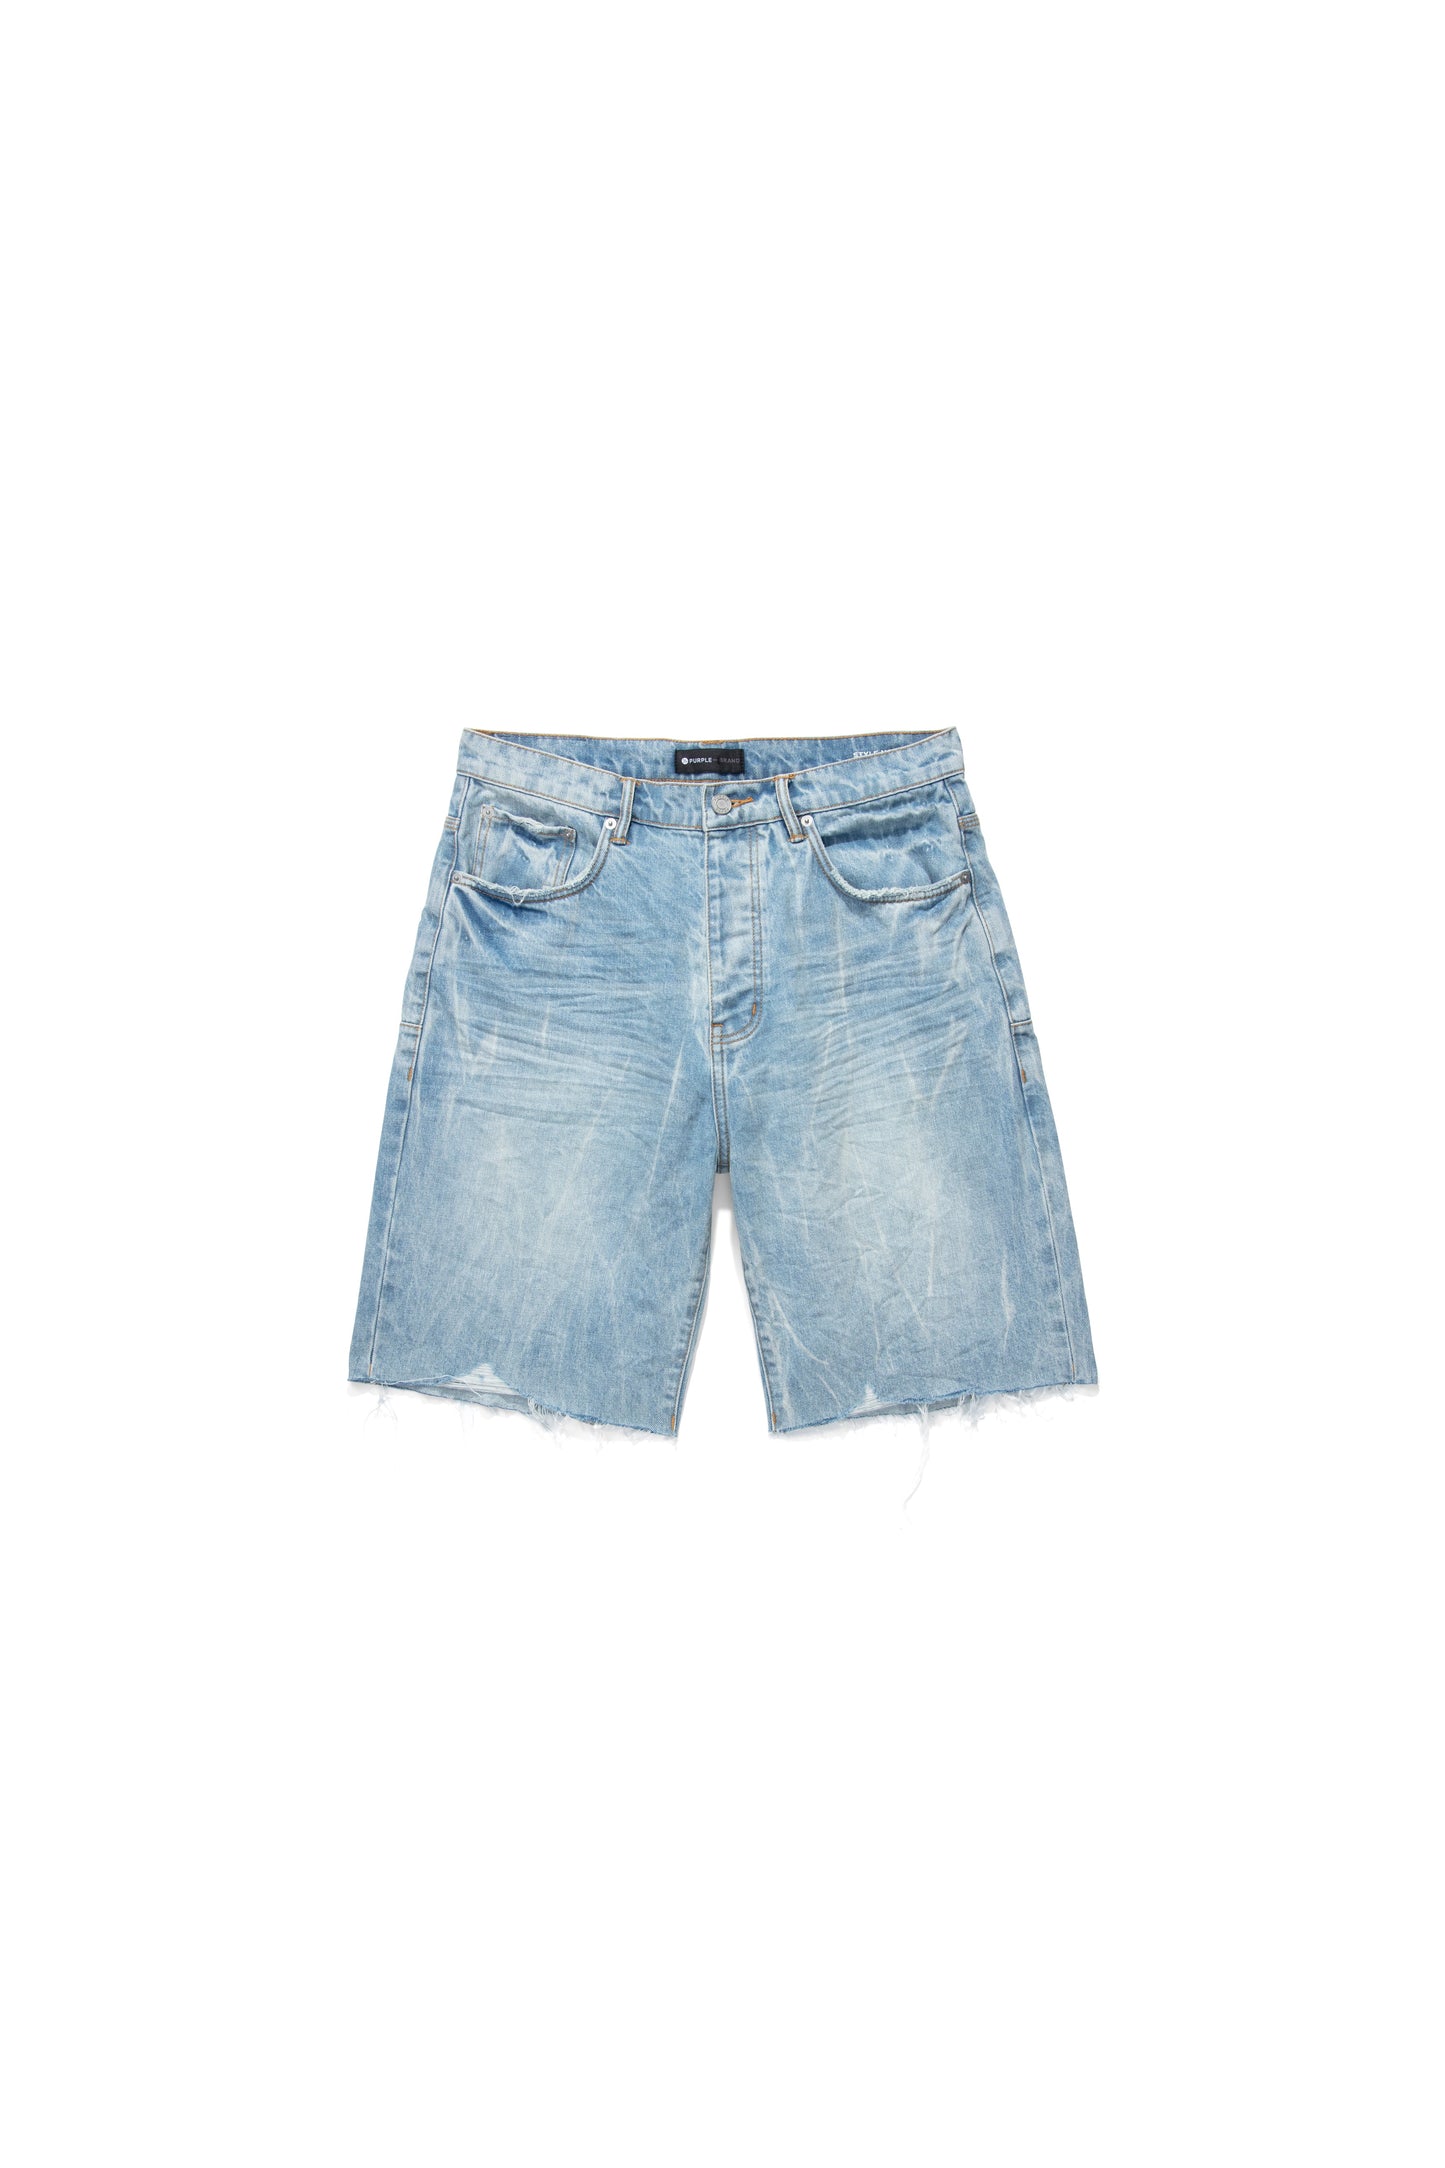 P021 RELAXED FIT SHORT - Light Indigo Tie Acid Relaxed Shorties